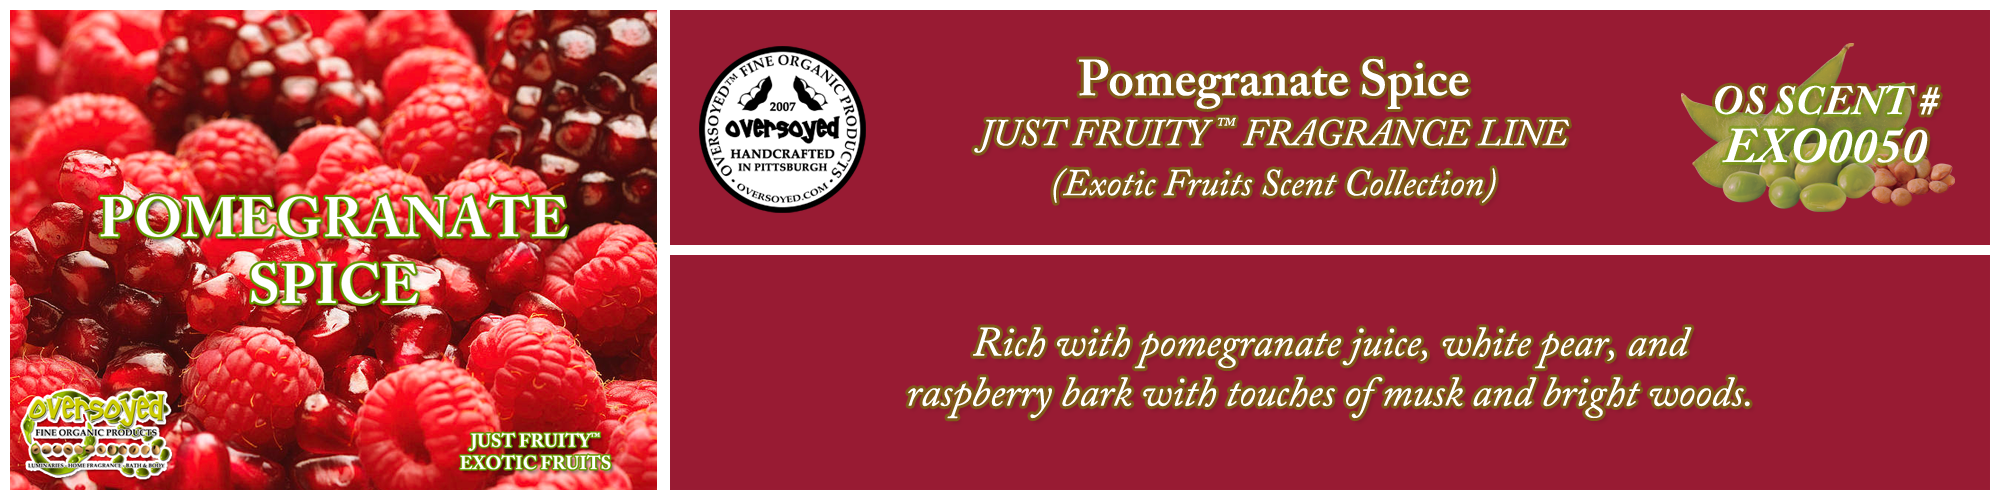 Pomegranate Spice Handcrafted Products Collection